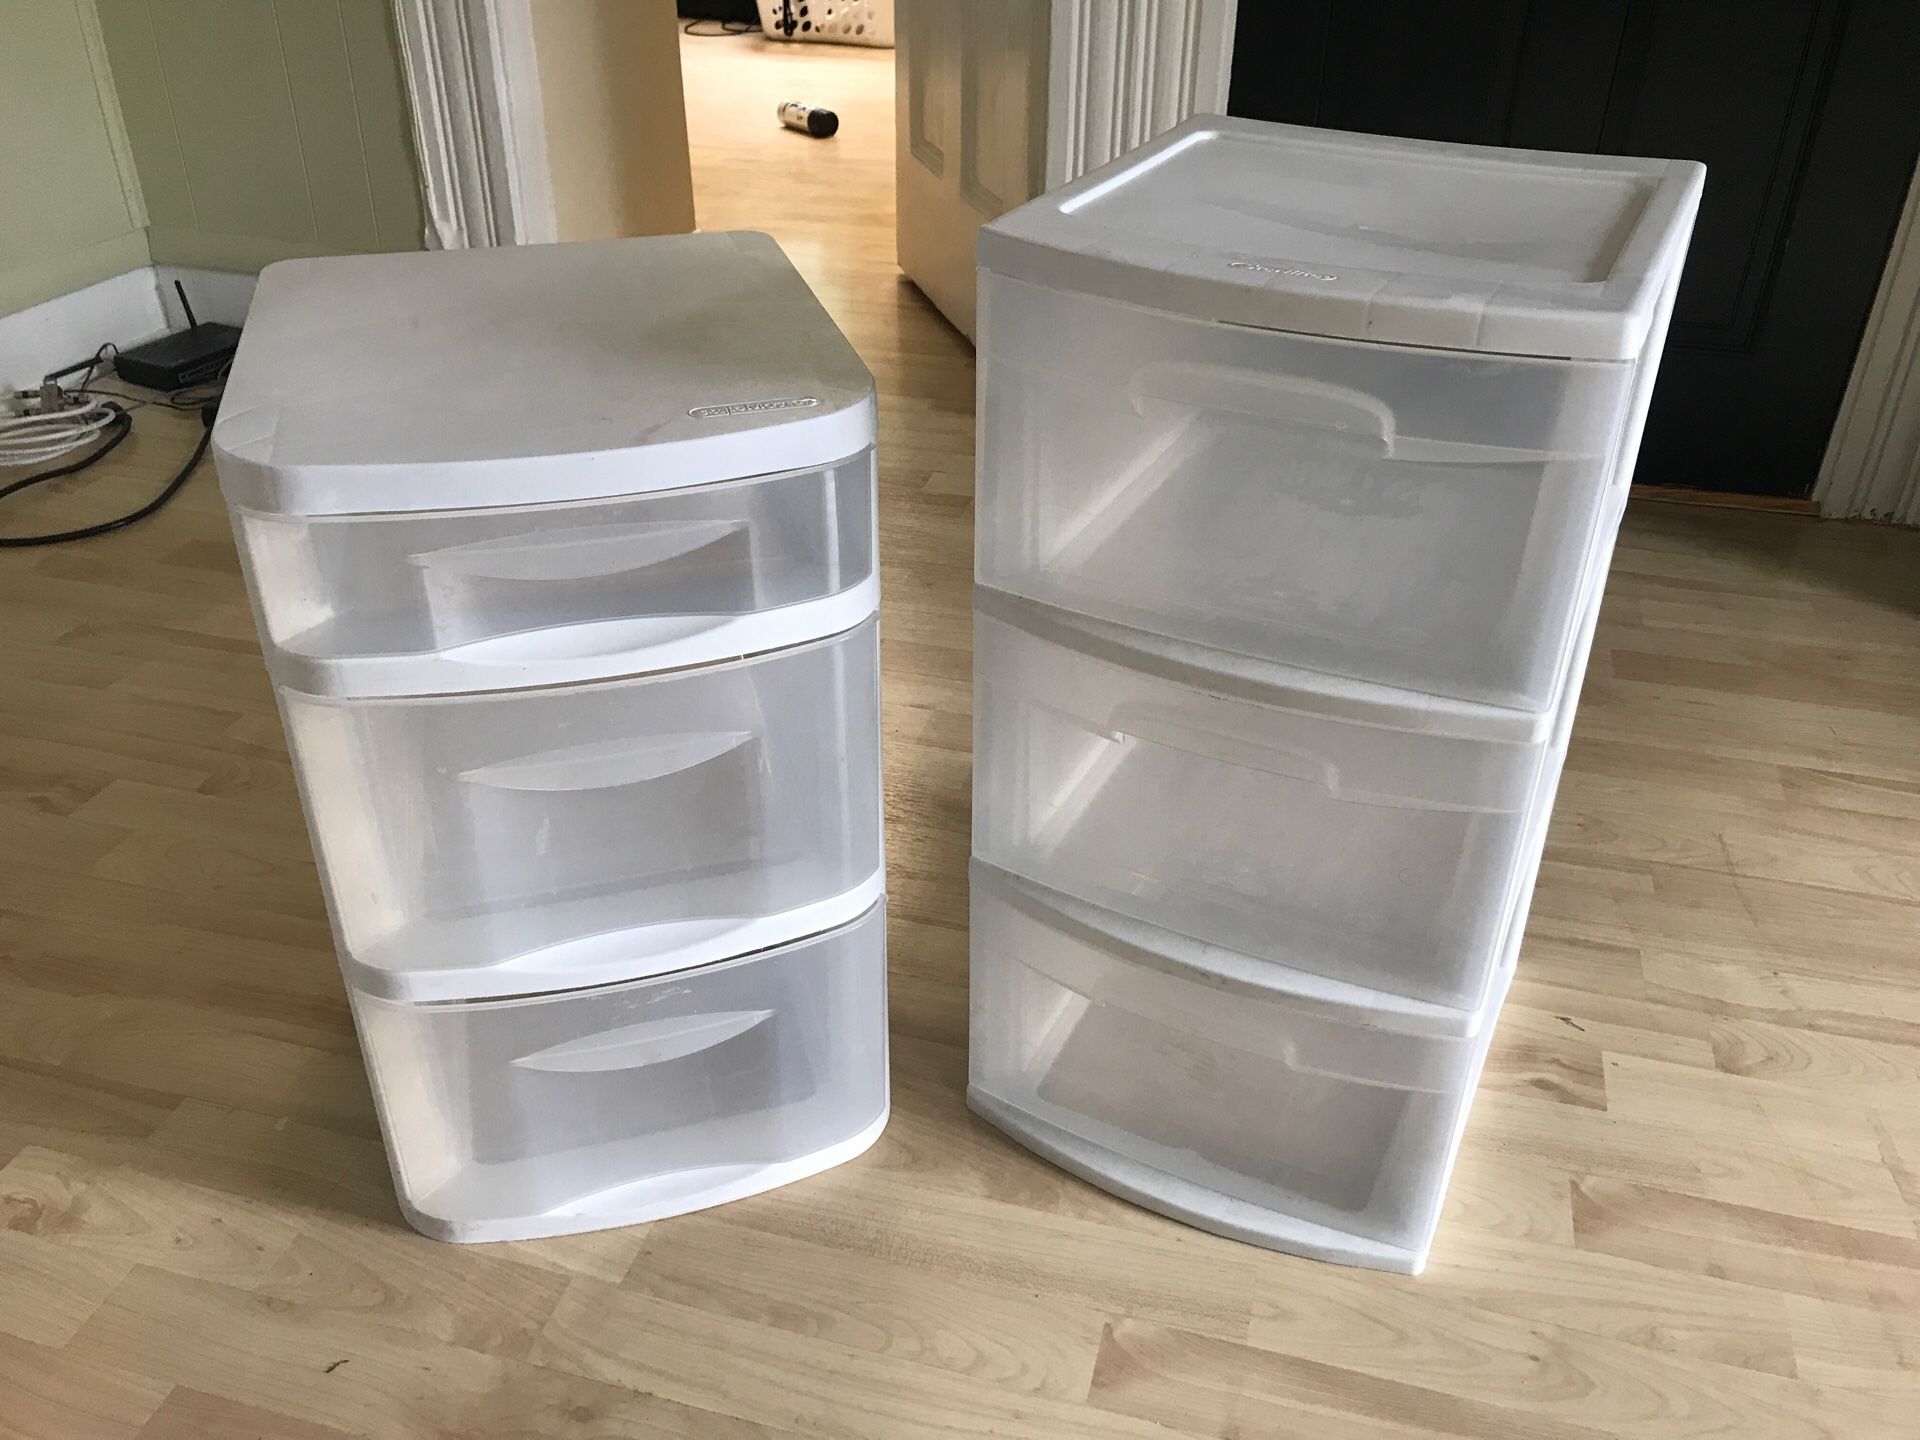 Plastic Storage Drawers (2 for $8)